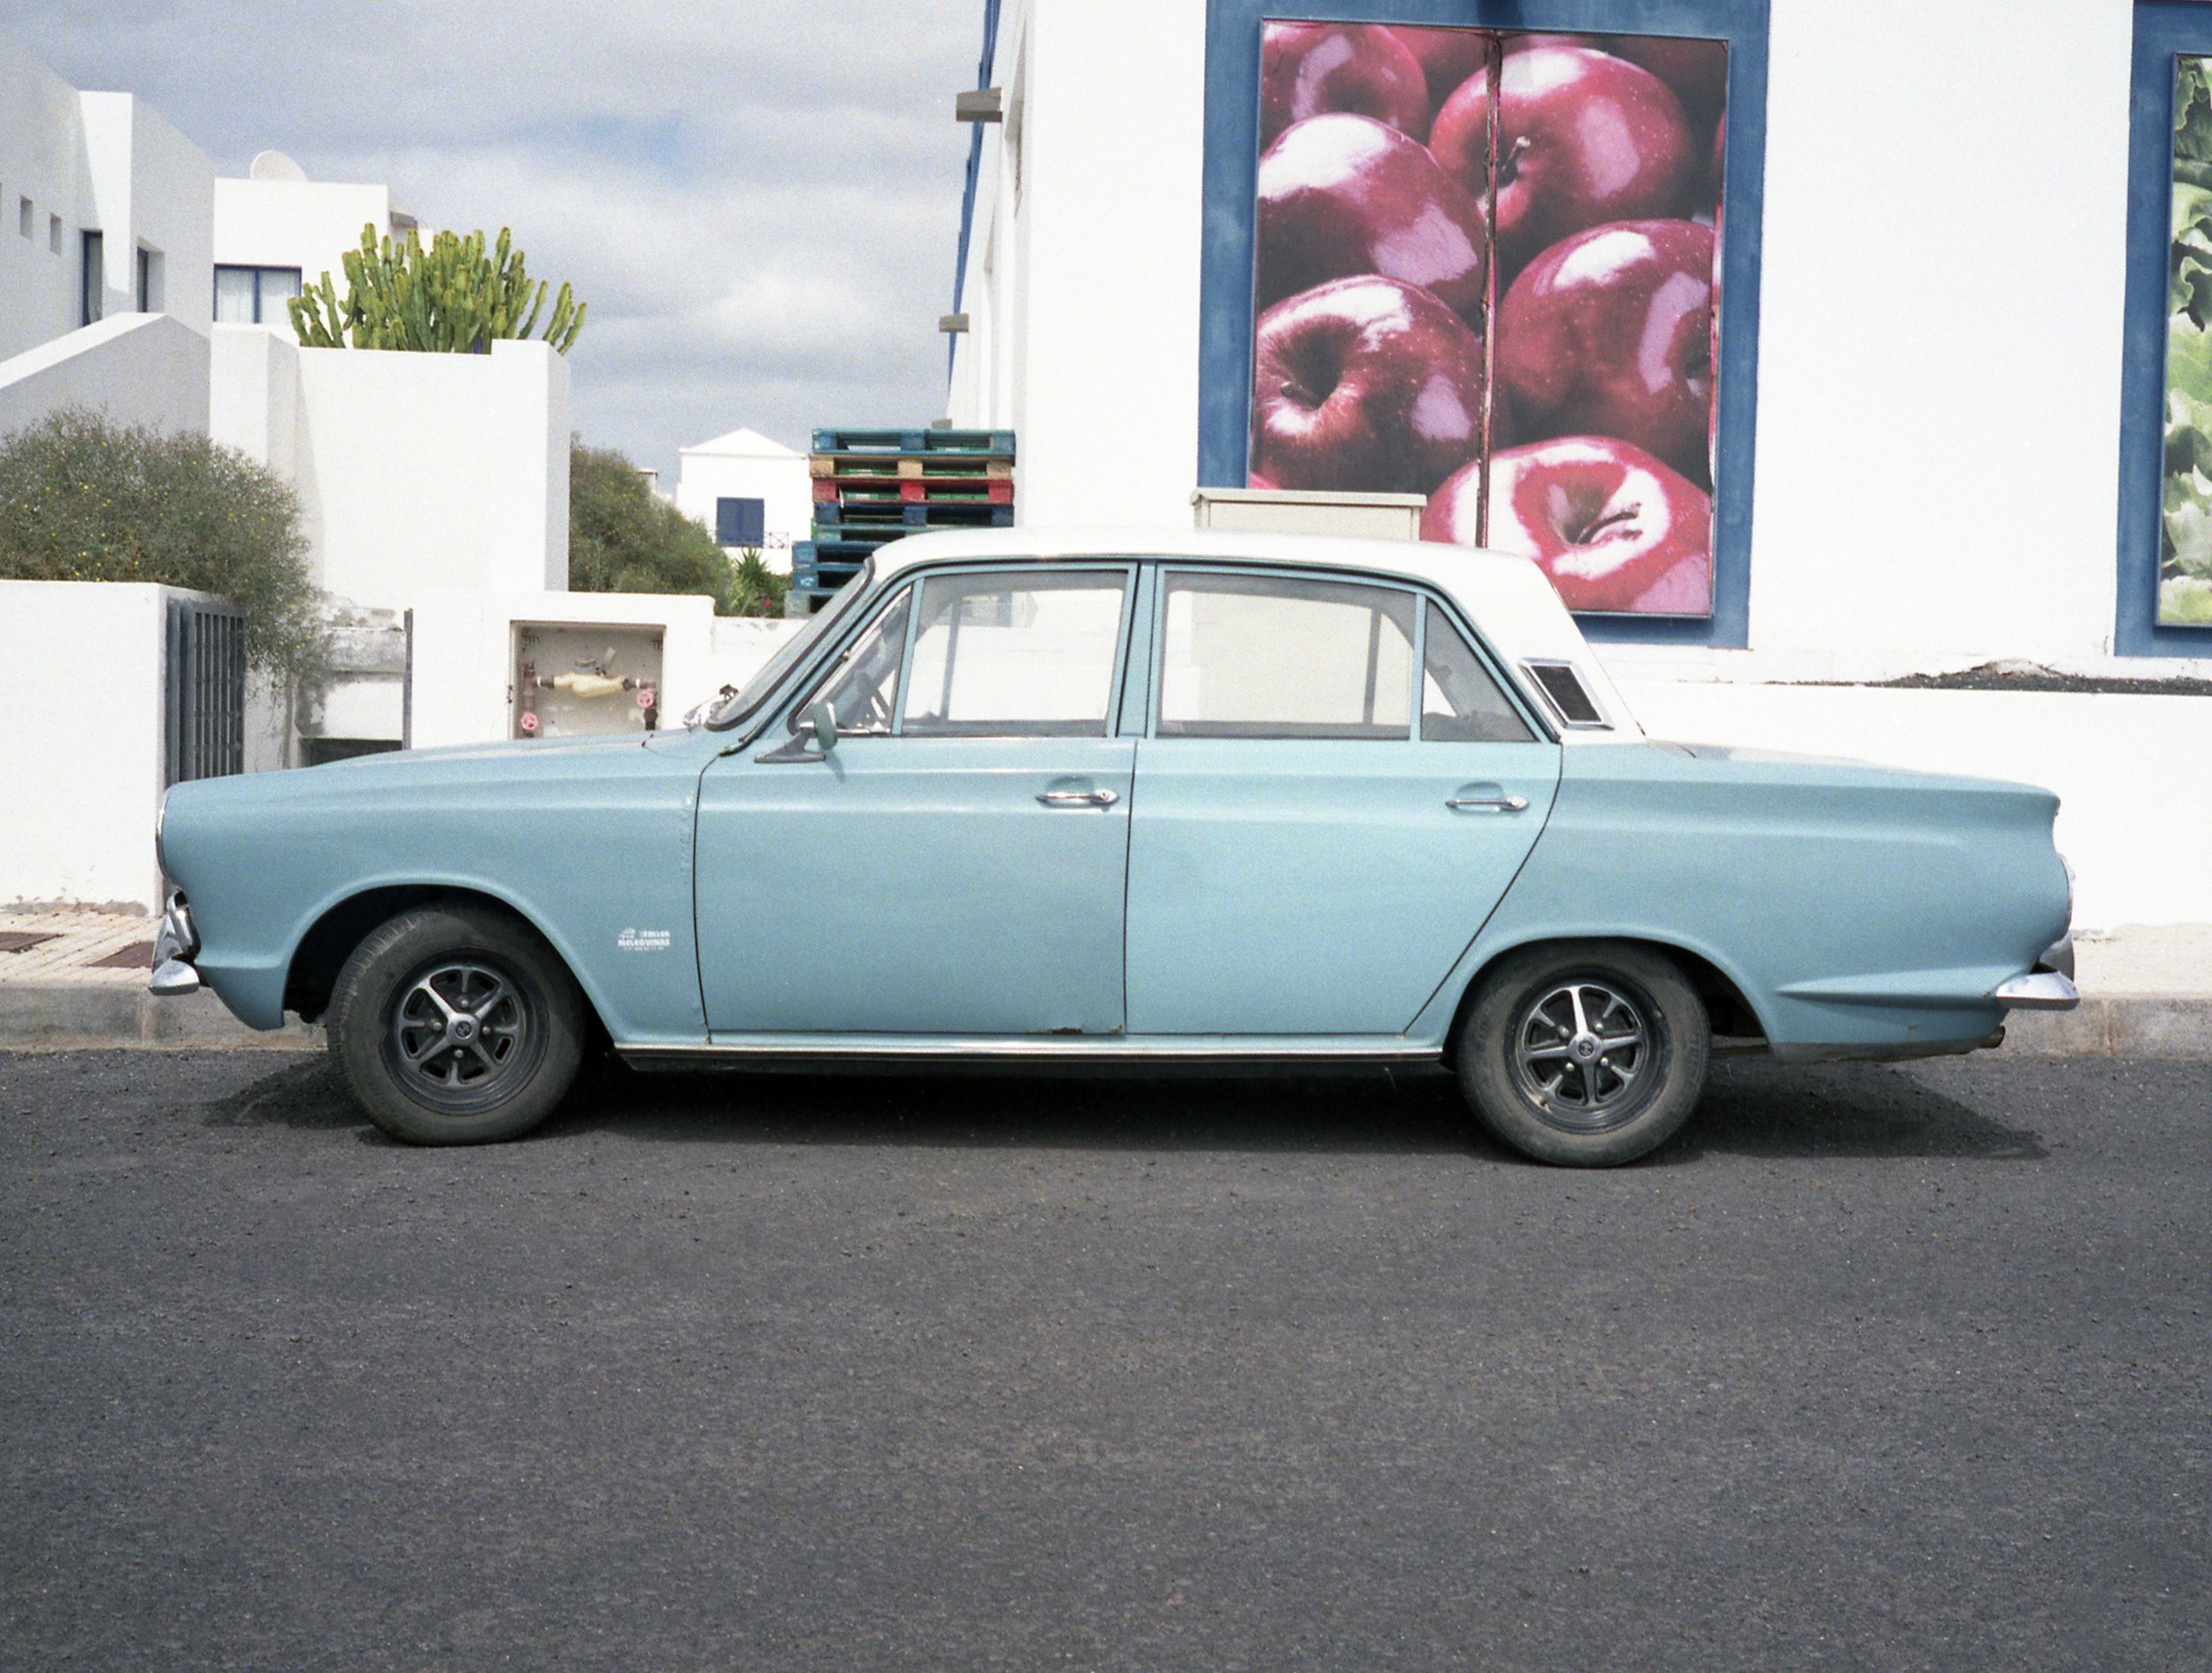  Ford Cortina In Lanzarote - Spain 